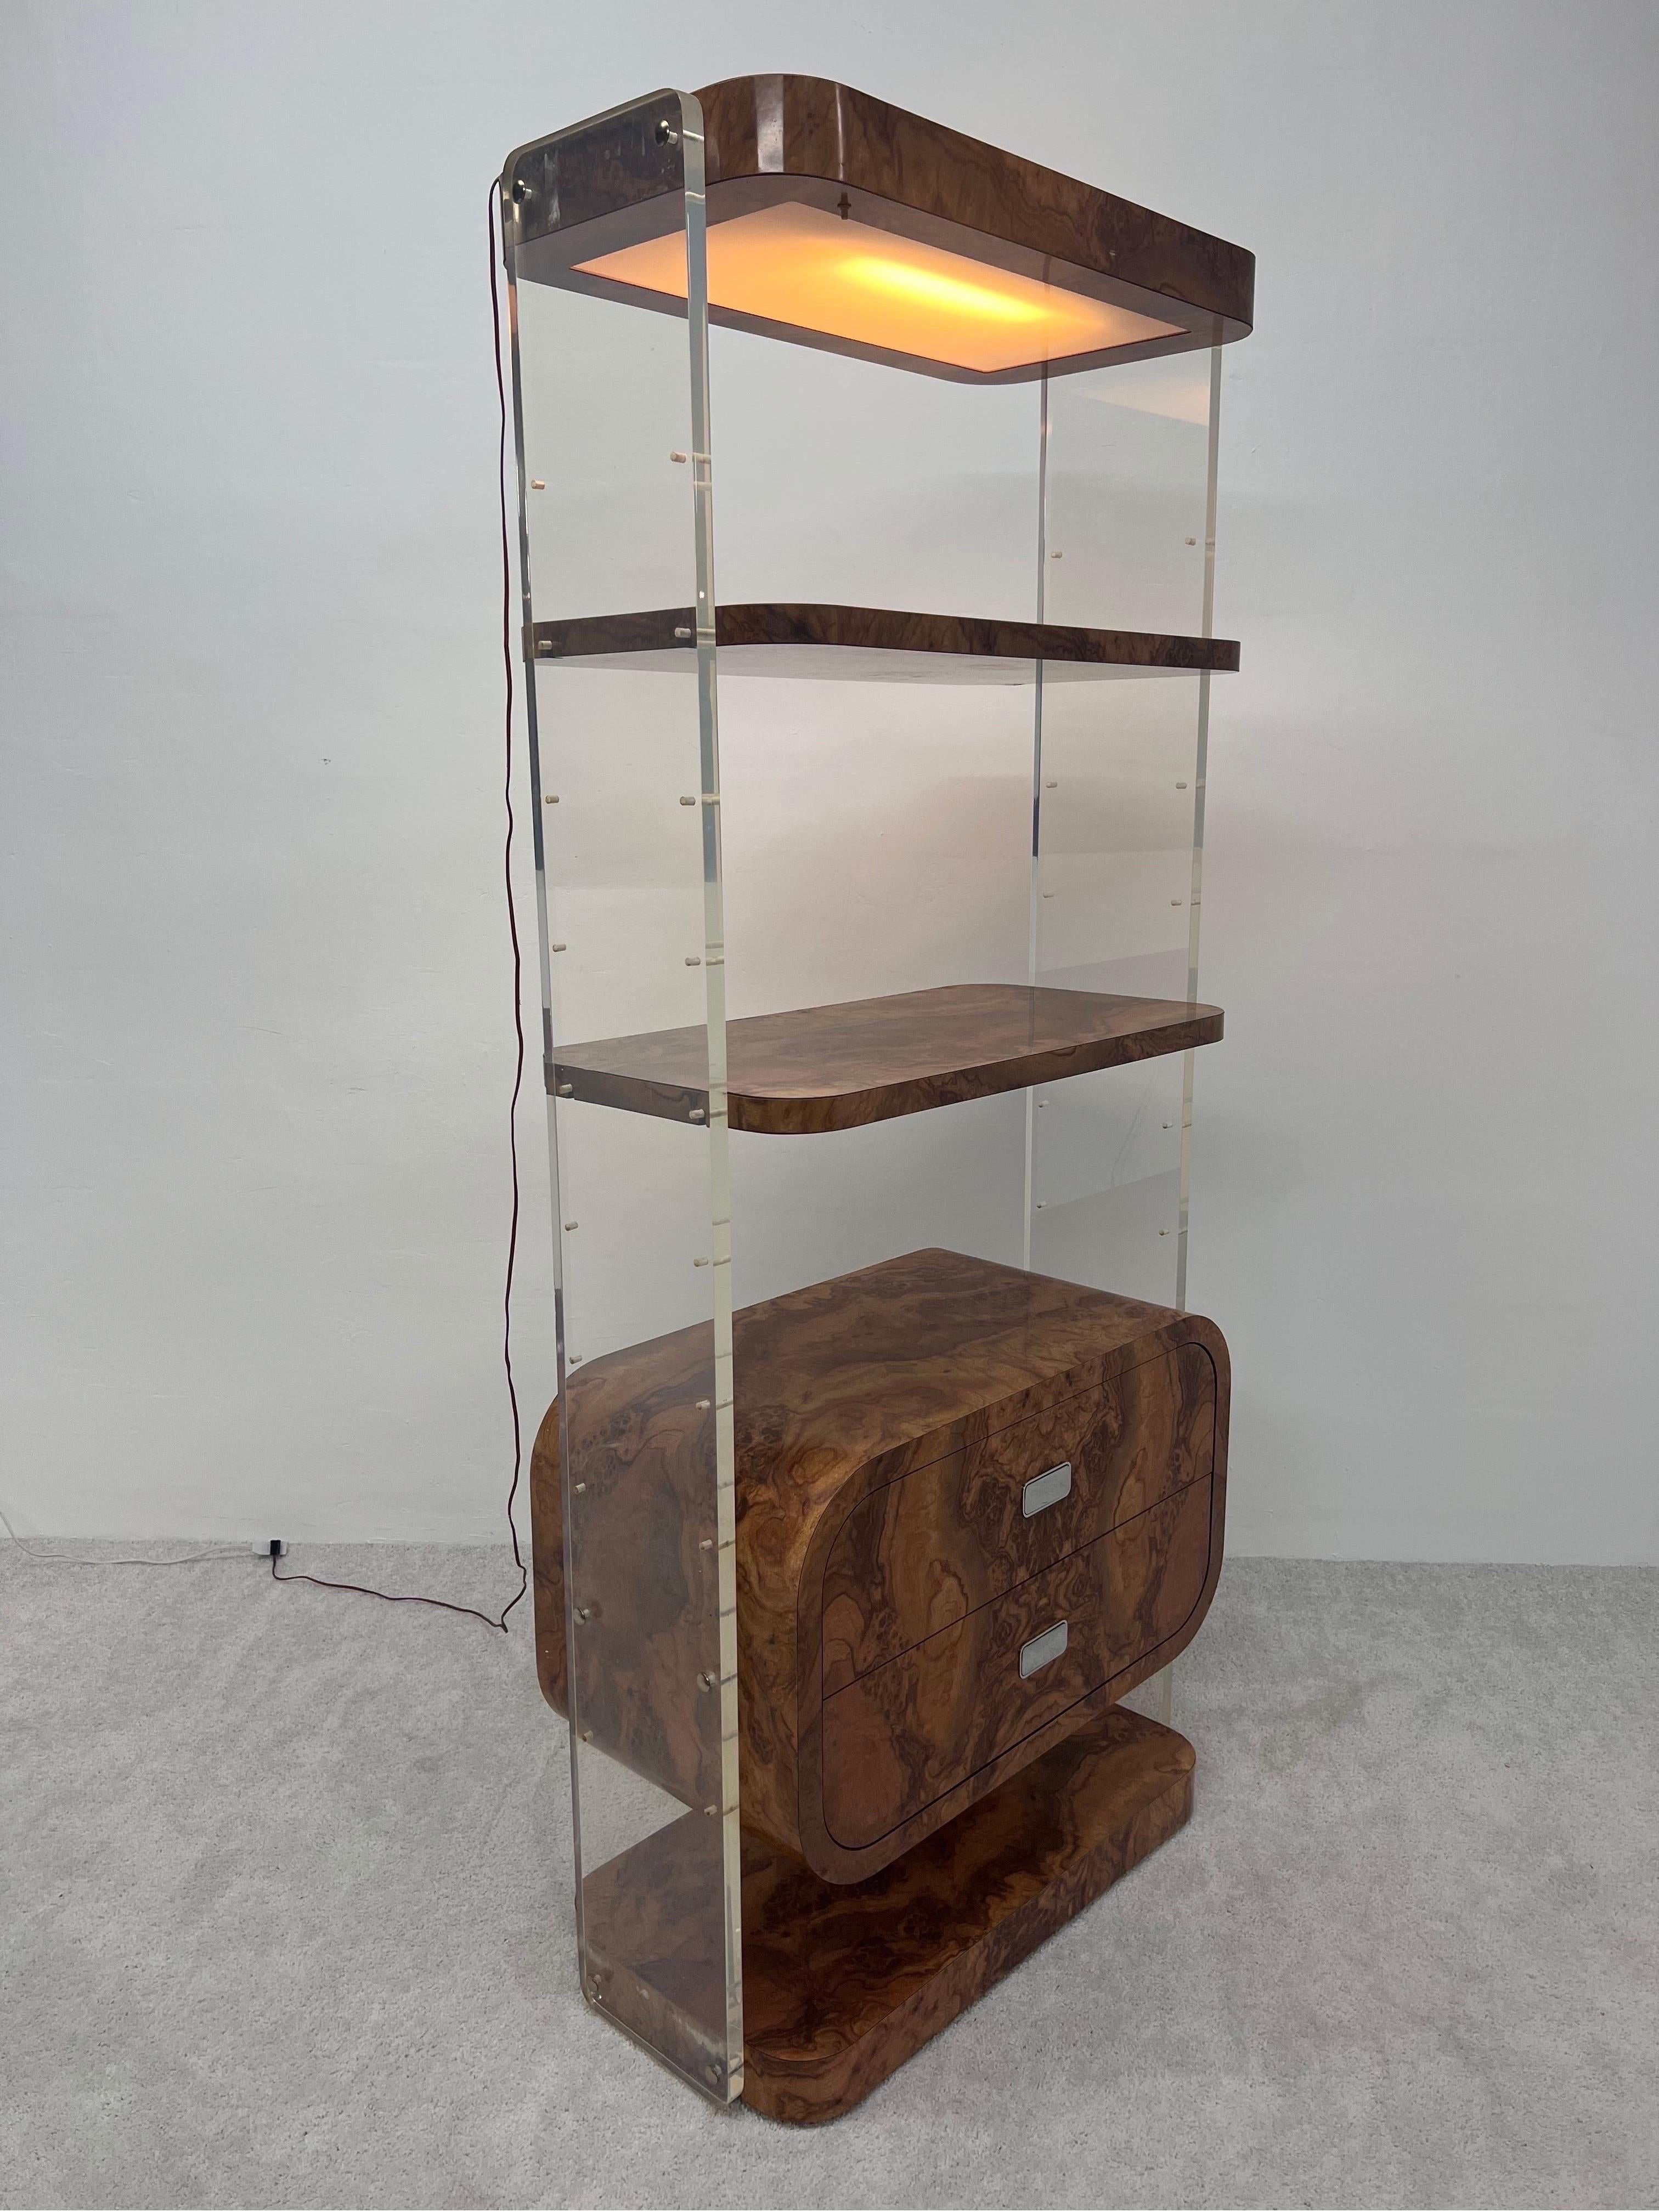 Lucite and faux burl wood veneer bookcase or etagere with adjustable shelves, two storage unit drawers and a canopy light. Lucite supports are one inch thick.